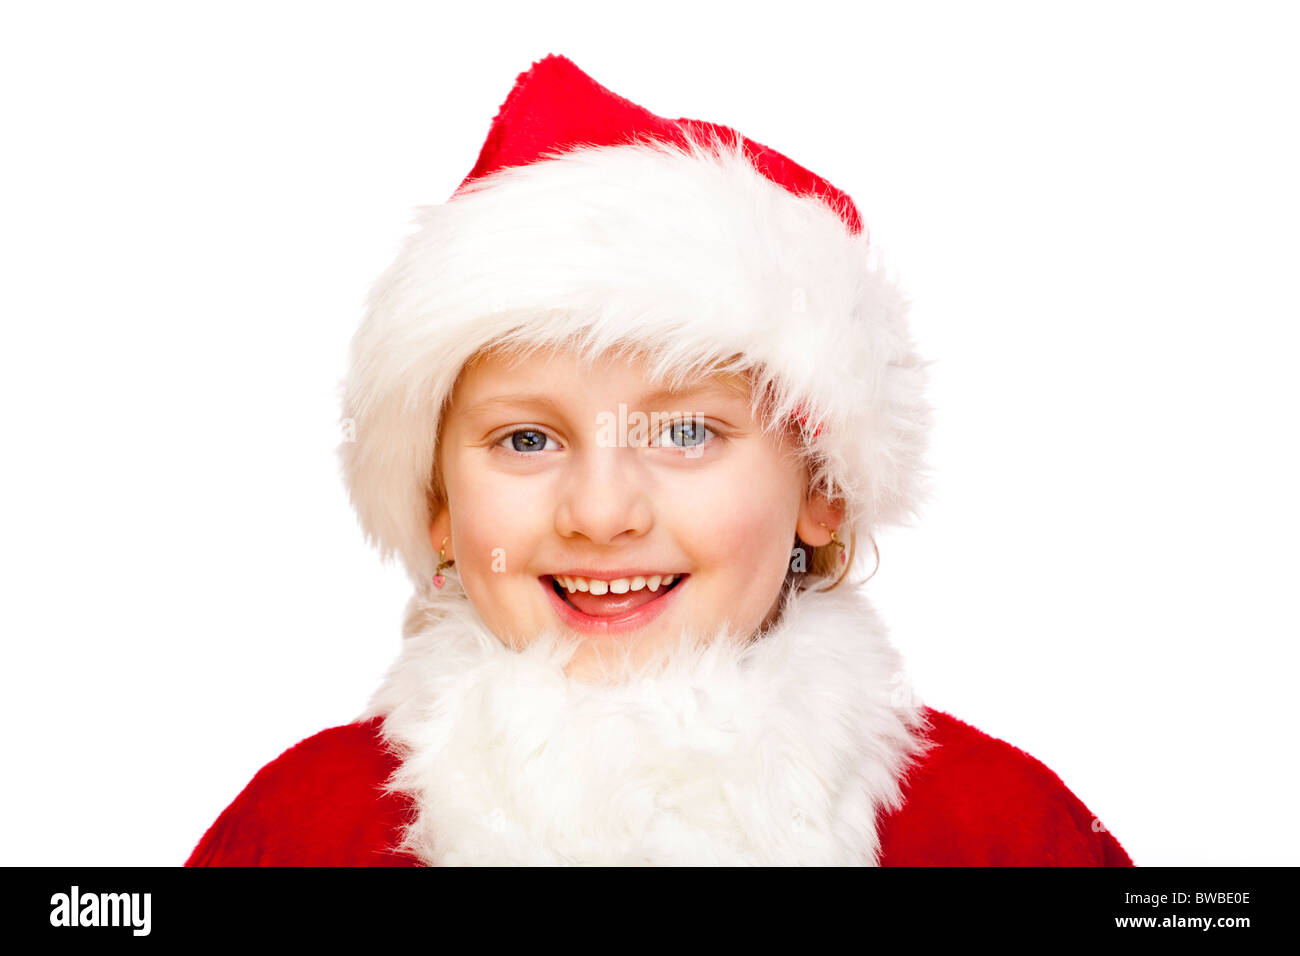 Small girl dressed as Santa Claus smiles happy into camera. Isolated on white background. Stock Photo